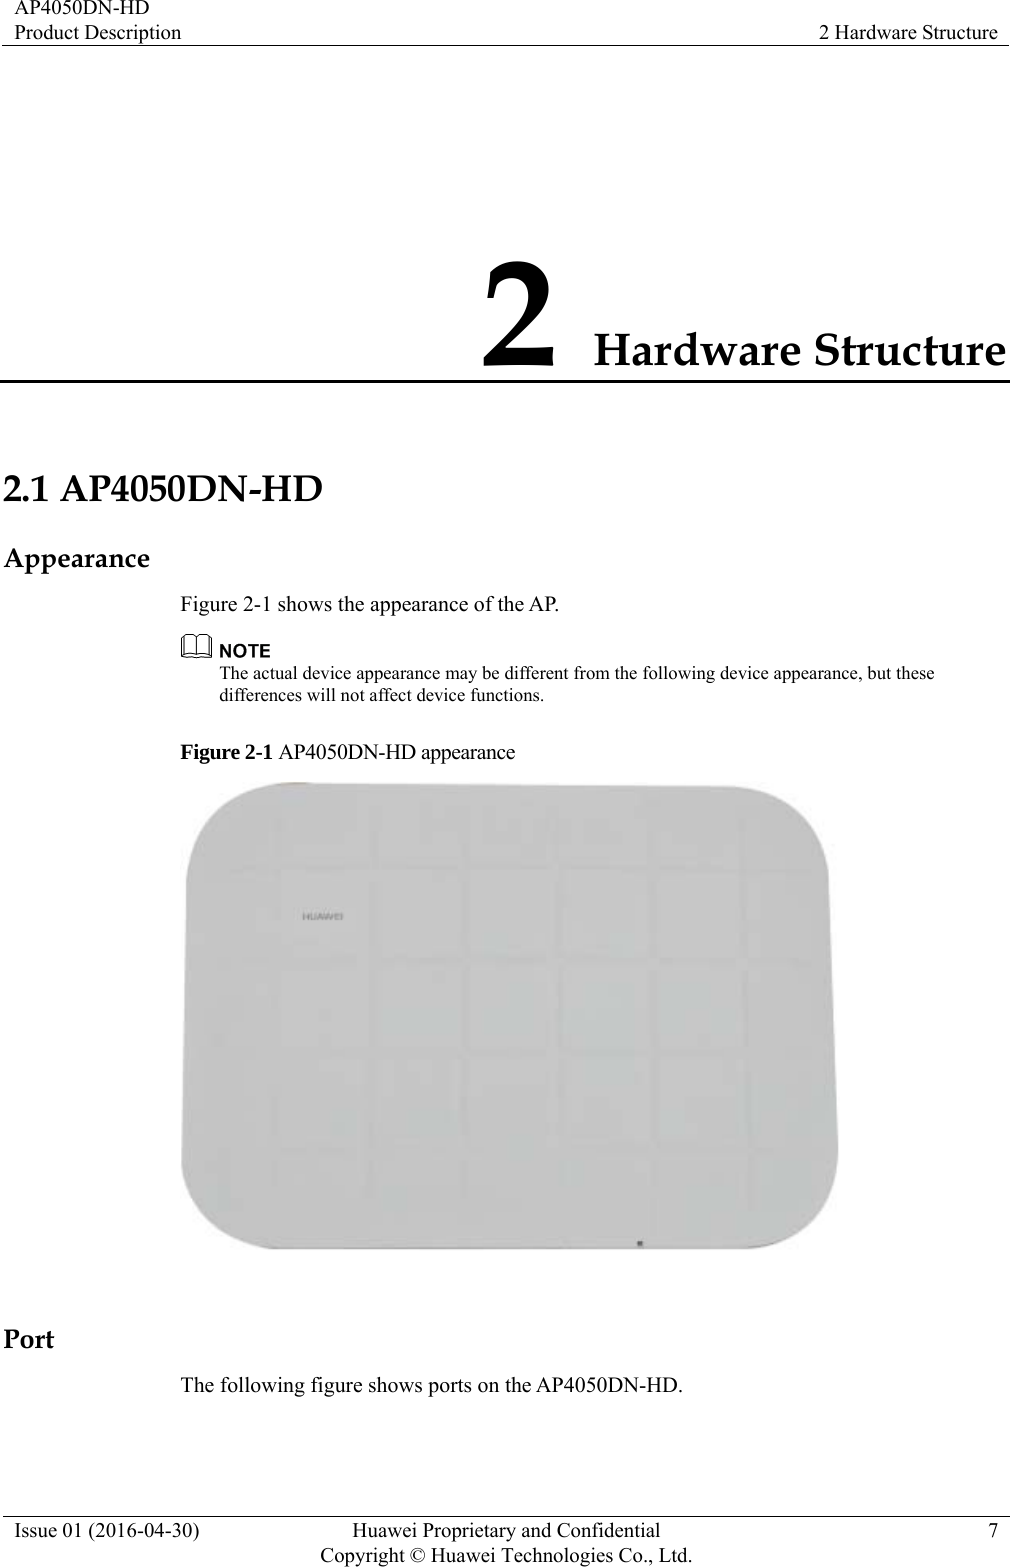 AP4050DN-HD Product Description  2 Hardware Structure Issue 01 (2016-04-30)  Huawei Proprietary and Confidential         Copyright © Huawei Technologies Co., Ltd.7 2 Hardware Structure 2.1 AP4050DN-HD Appearance Figure 2-1 shows the appearance of the AP.  The actual device appearance may be different from the following device appearance, but these differences will not affect device functions. Figure 2-1 AP4050DN-HD appearance   Port The following figure shows ports on the AP4050DN-HD. 